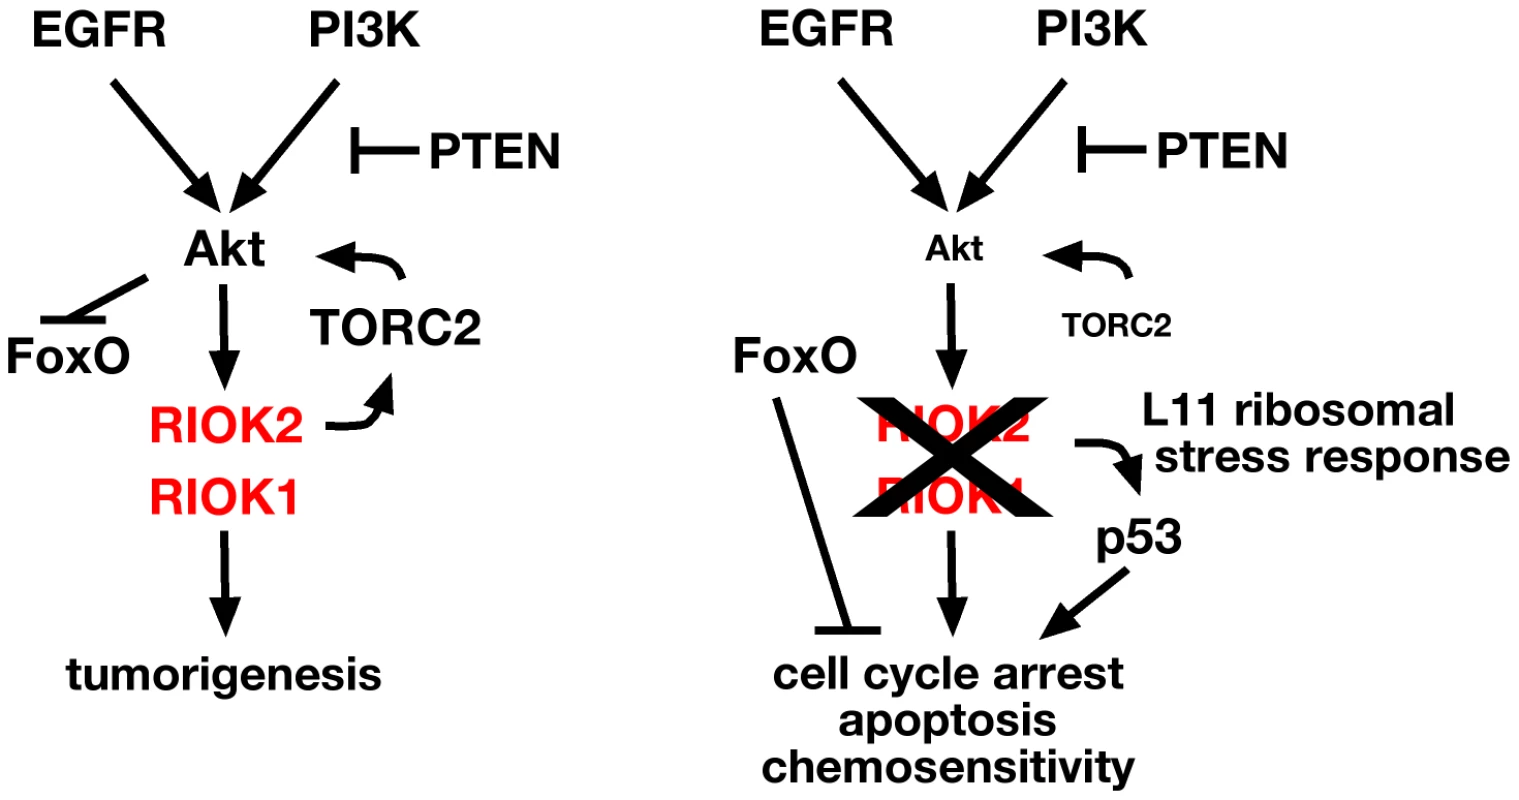 RIOK1 and RIOK2 are required for EGFR- and PI3K-mediated tumorigenesis.